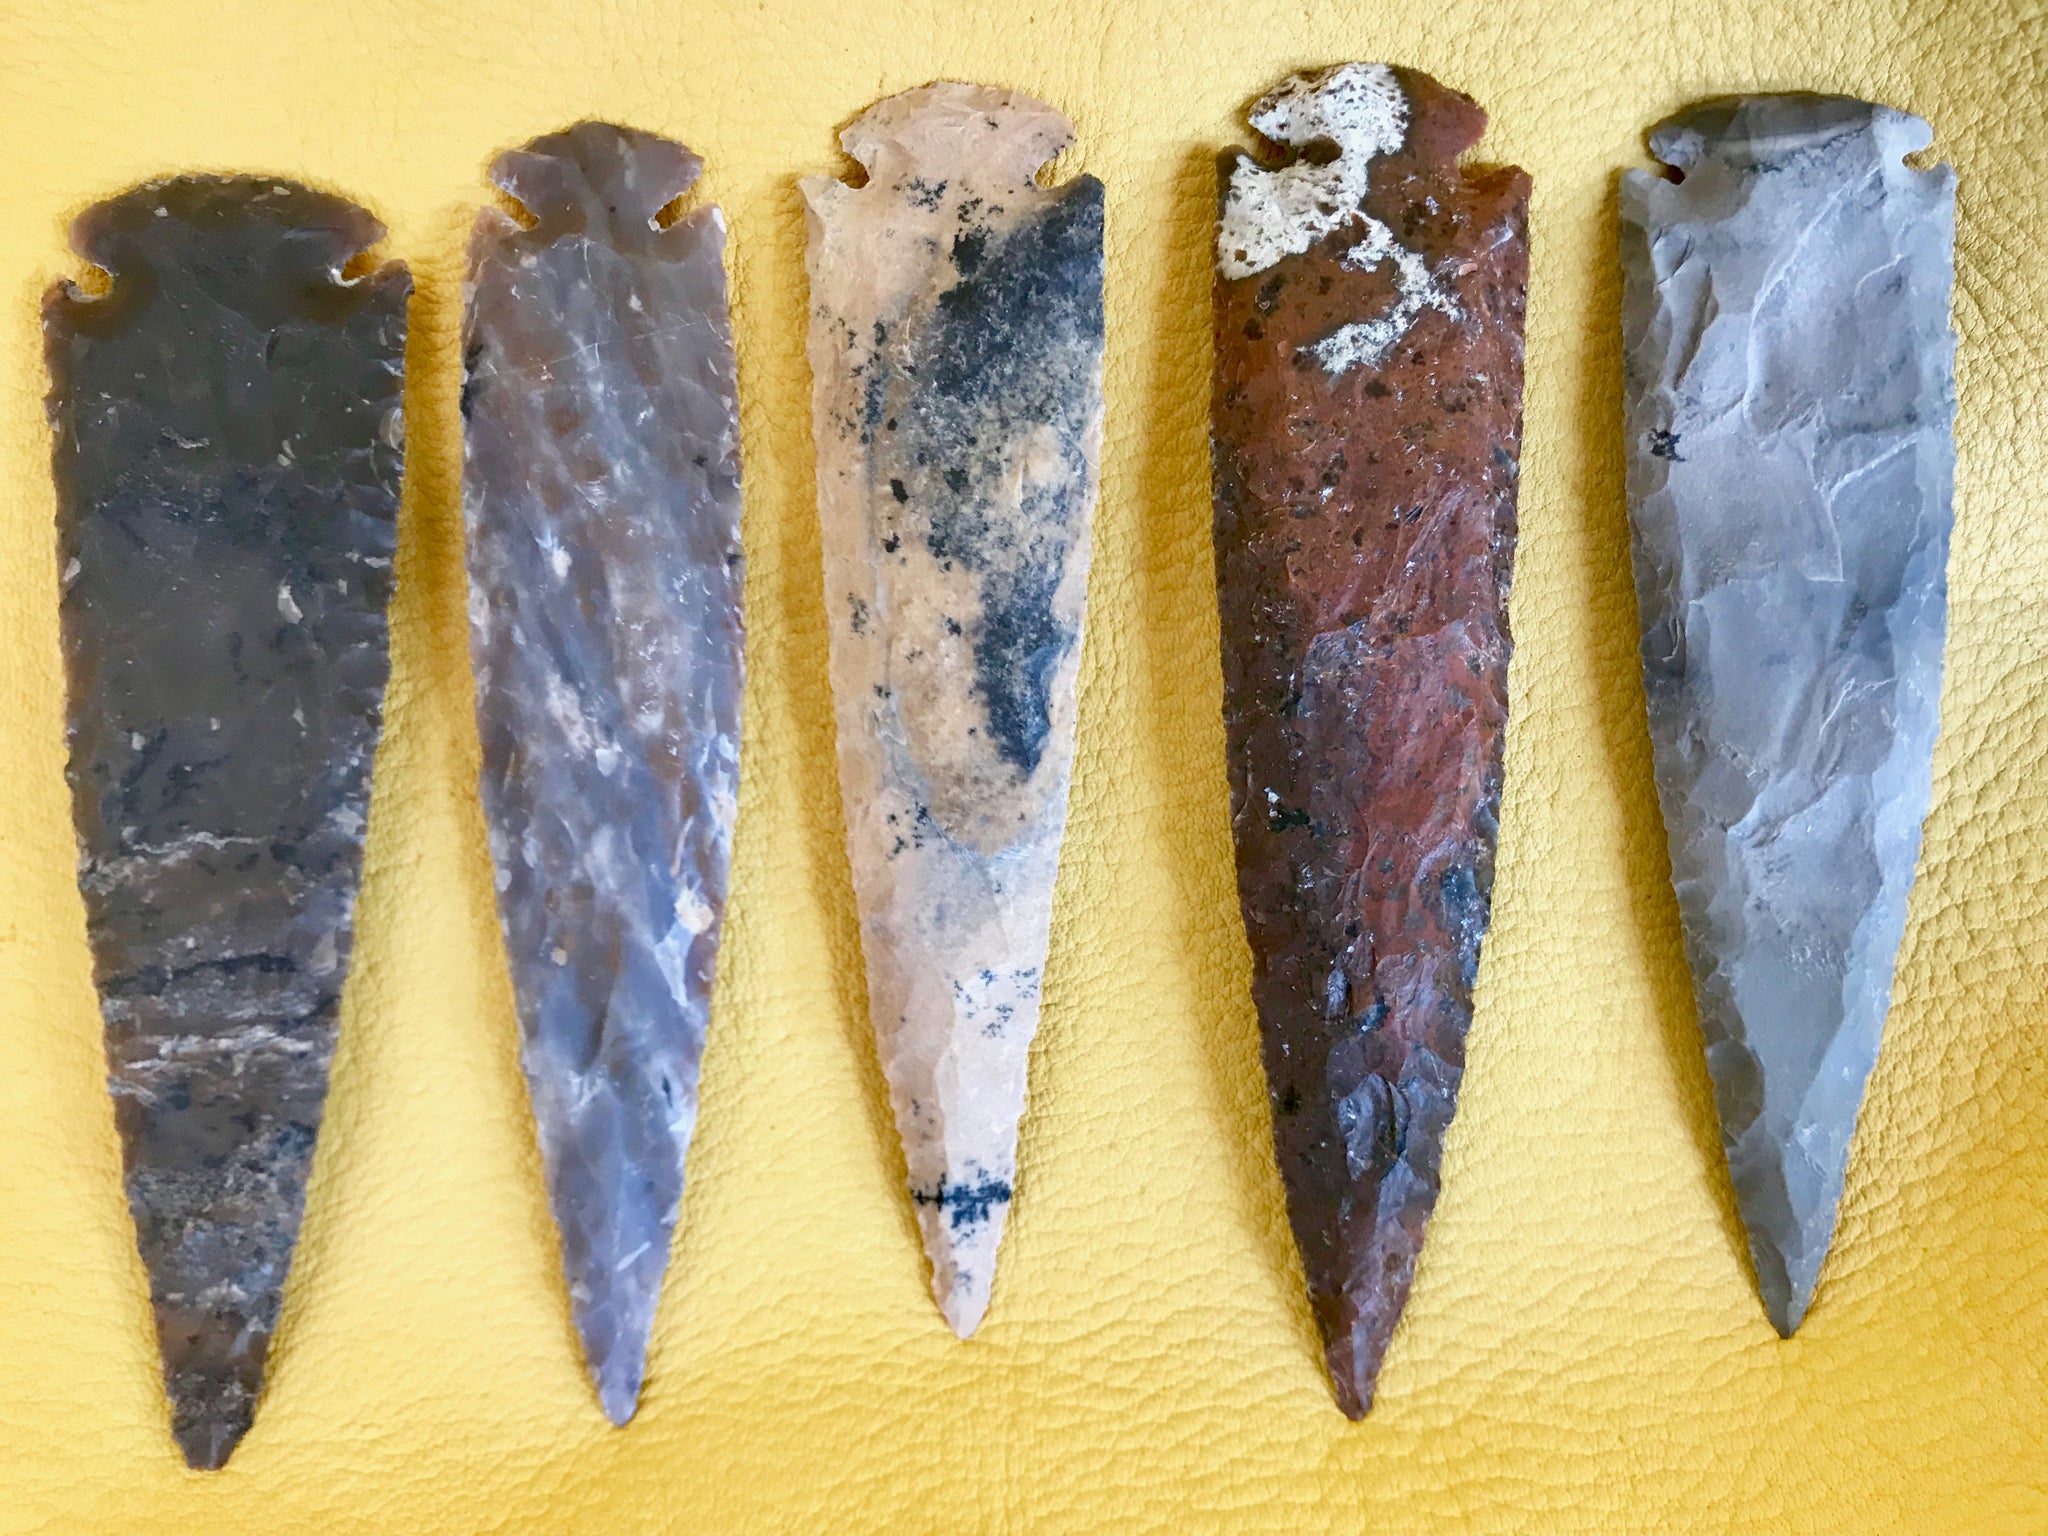 Pin on Arrowheads and tools